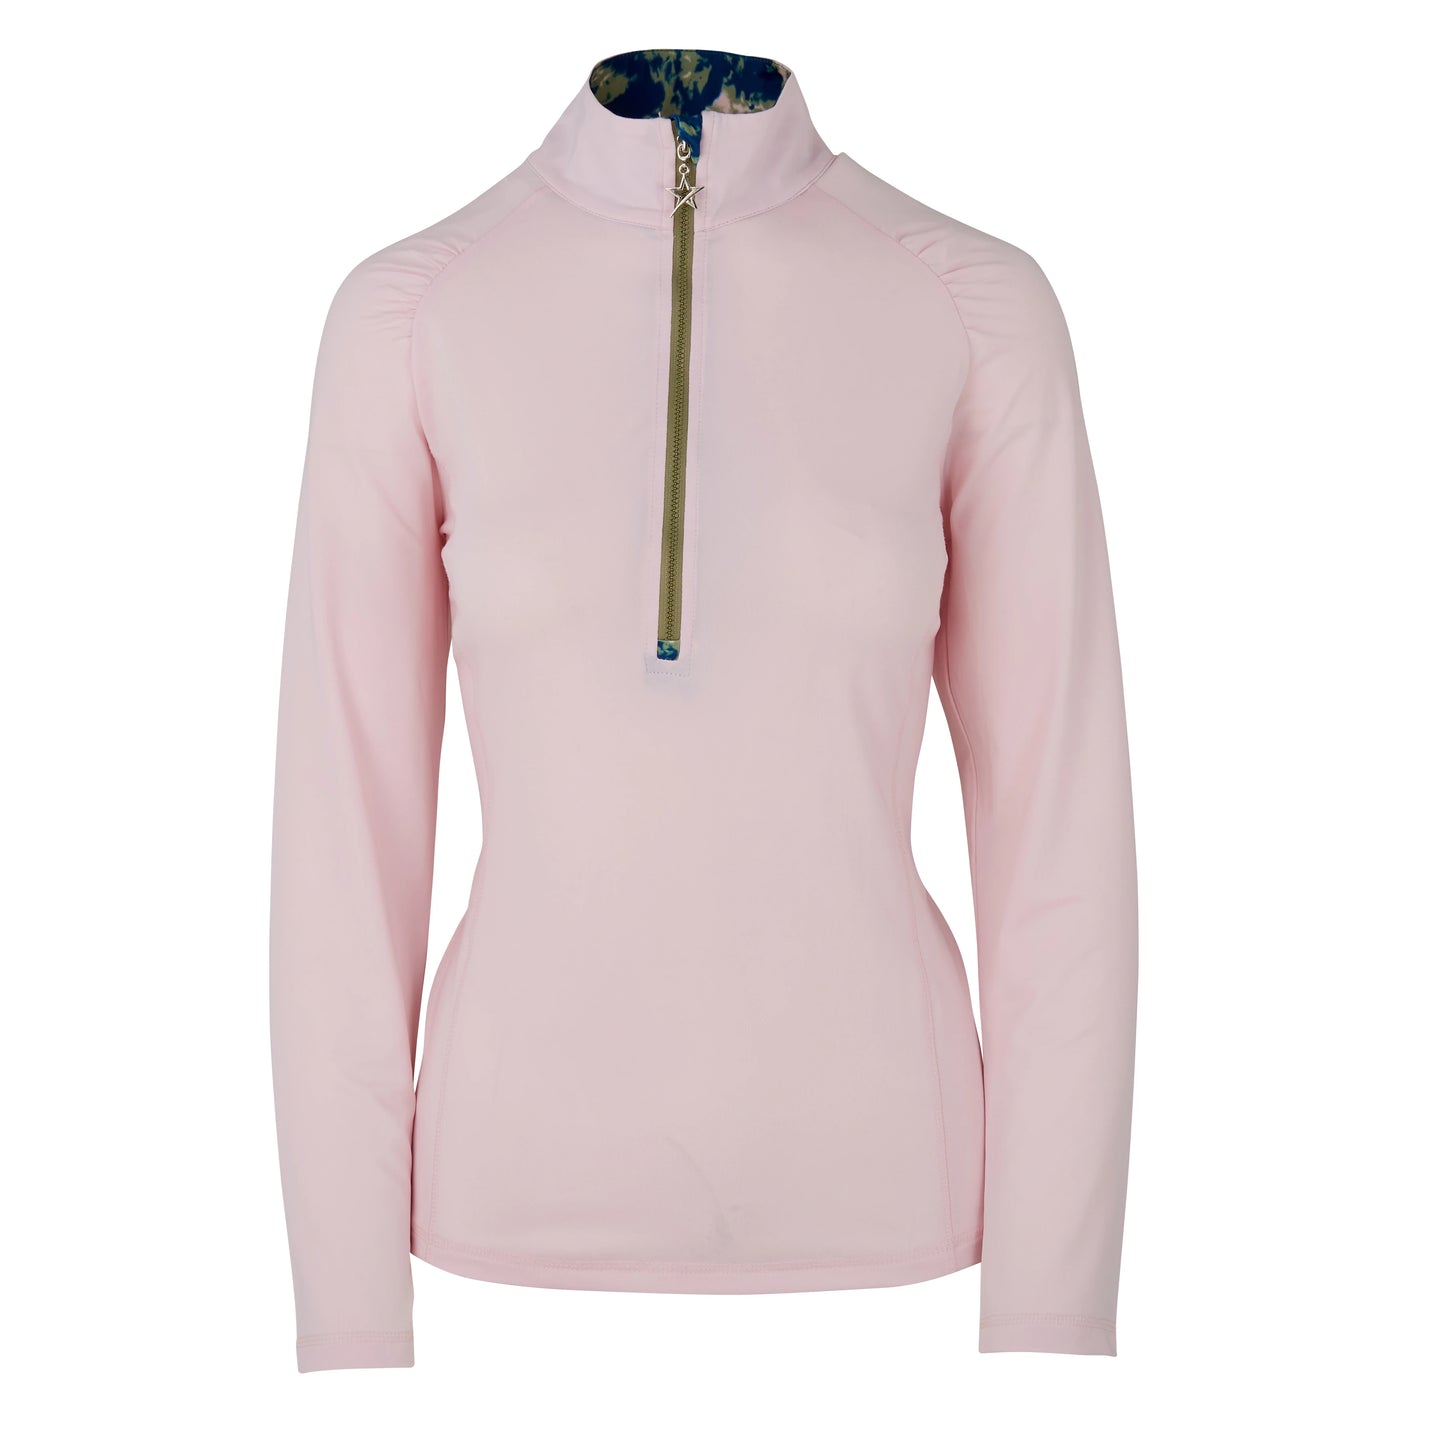 Swing Out Sister Celeste 1/4 Zip Mid Layer Top - Chery Blossom